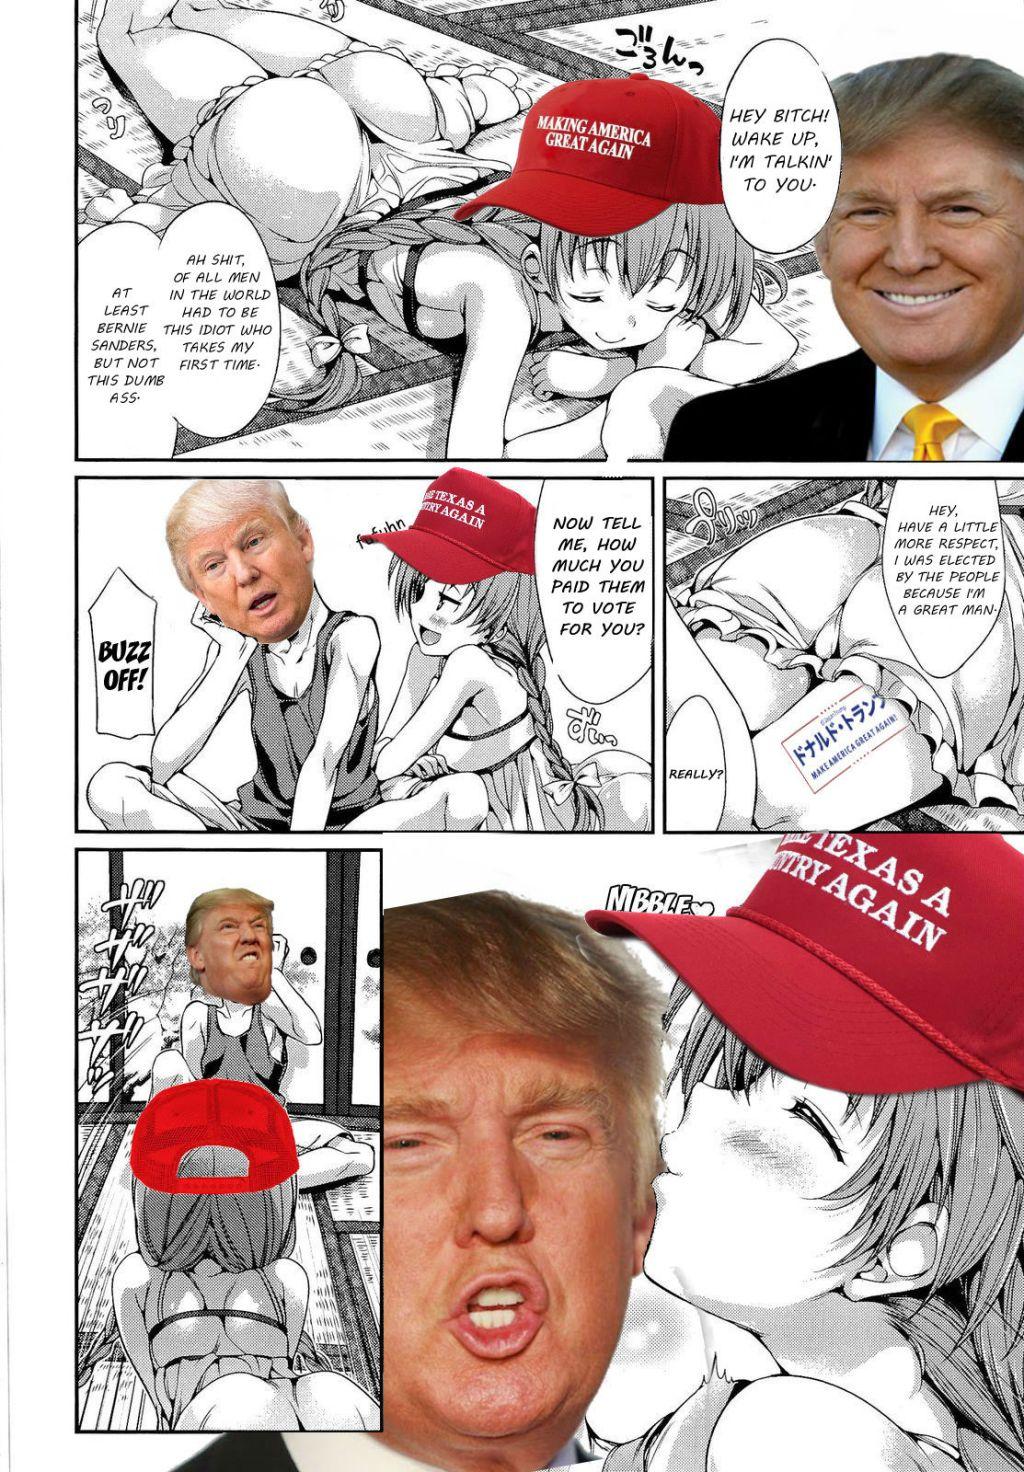 Hot Women Having Sex Donald Trump: Make America Great Again! Massages - Page 4